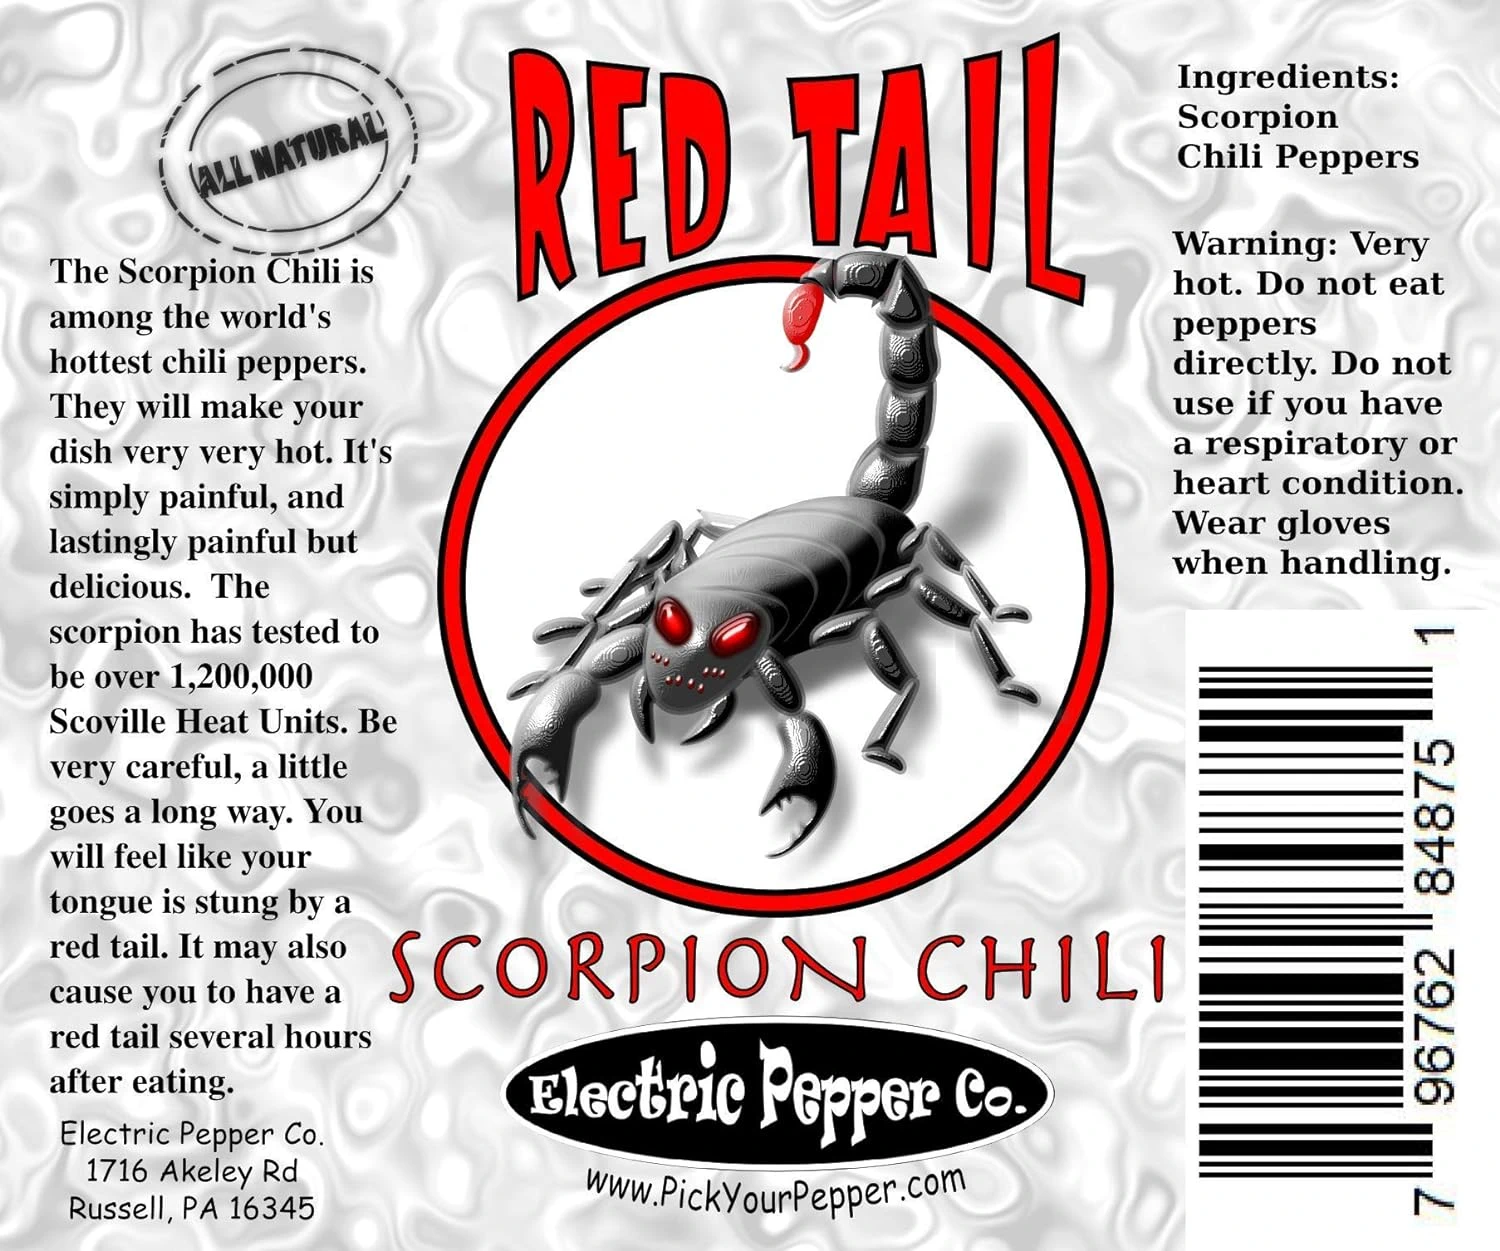 Product Label For Red Tail Scorpion Peppers - 
7 Count